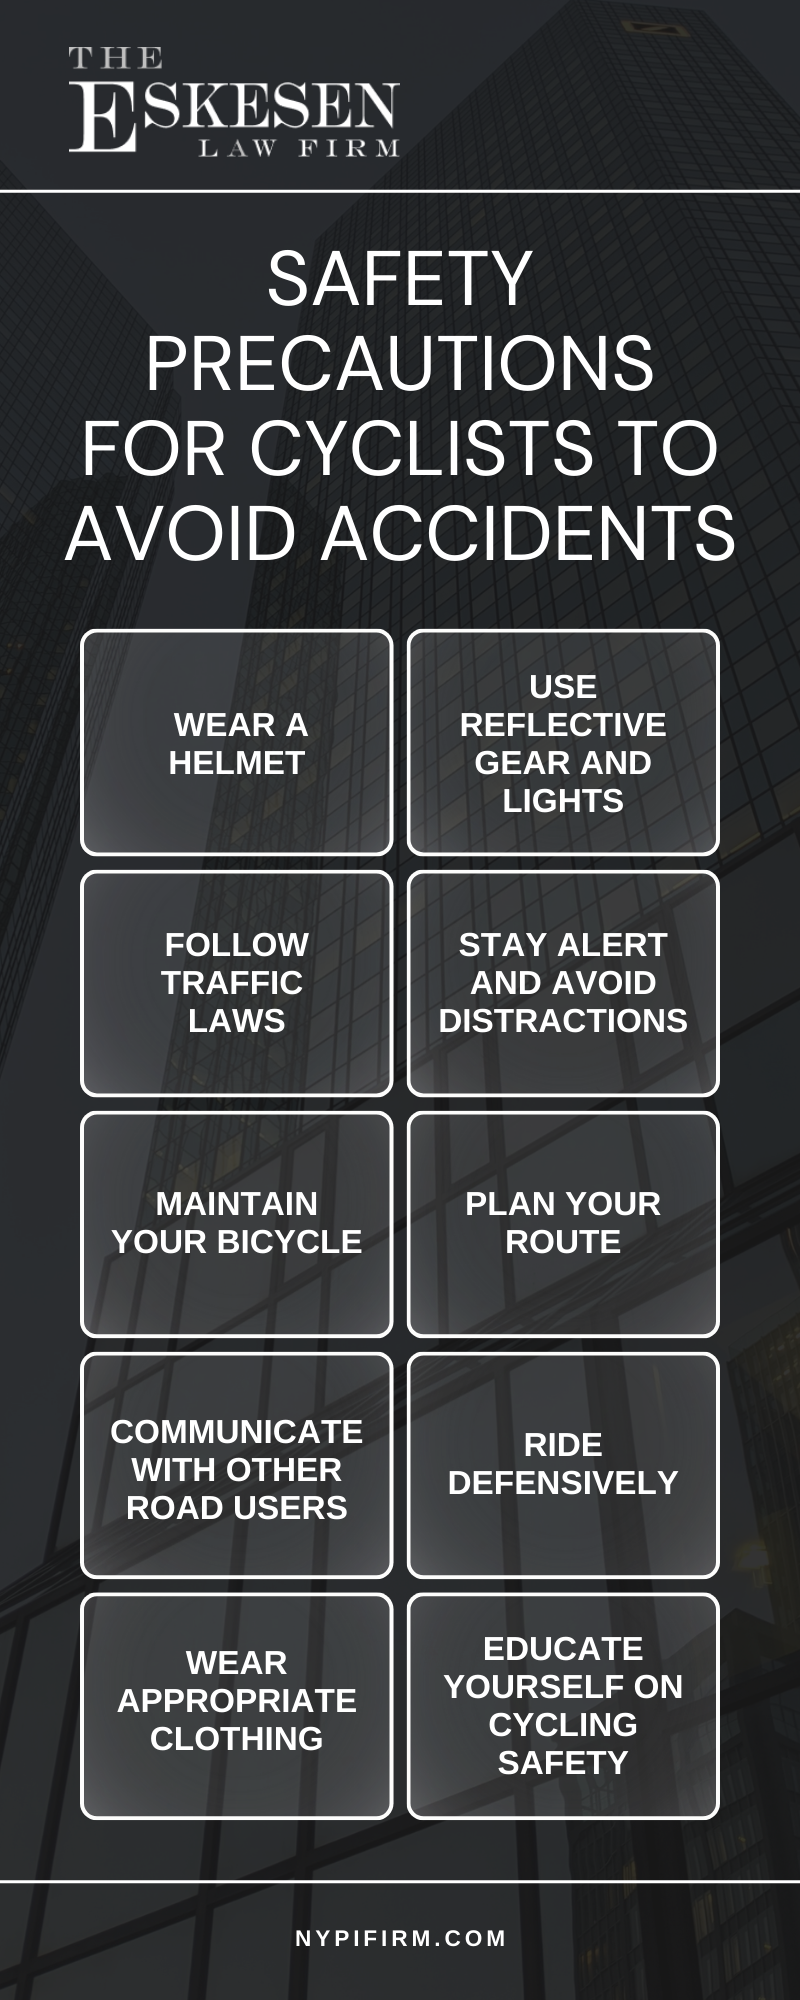 Safety Precautions For Cyclists To Avoid Accidents Infographic